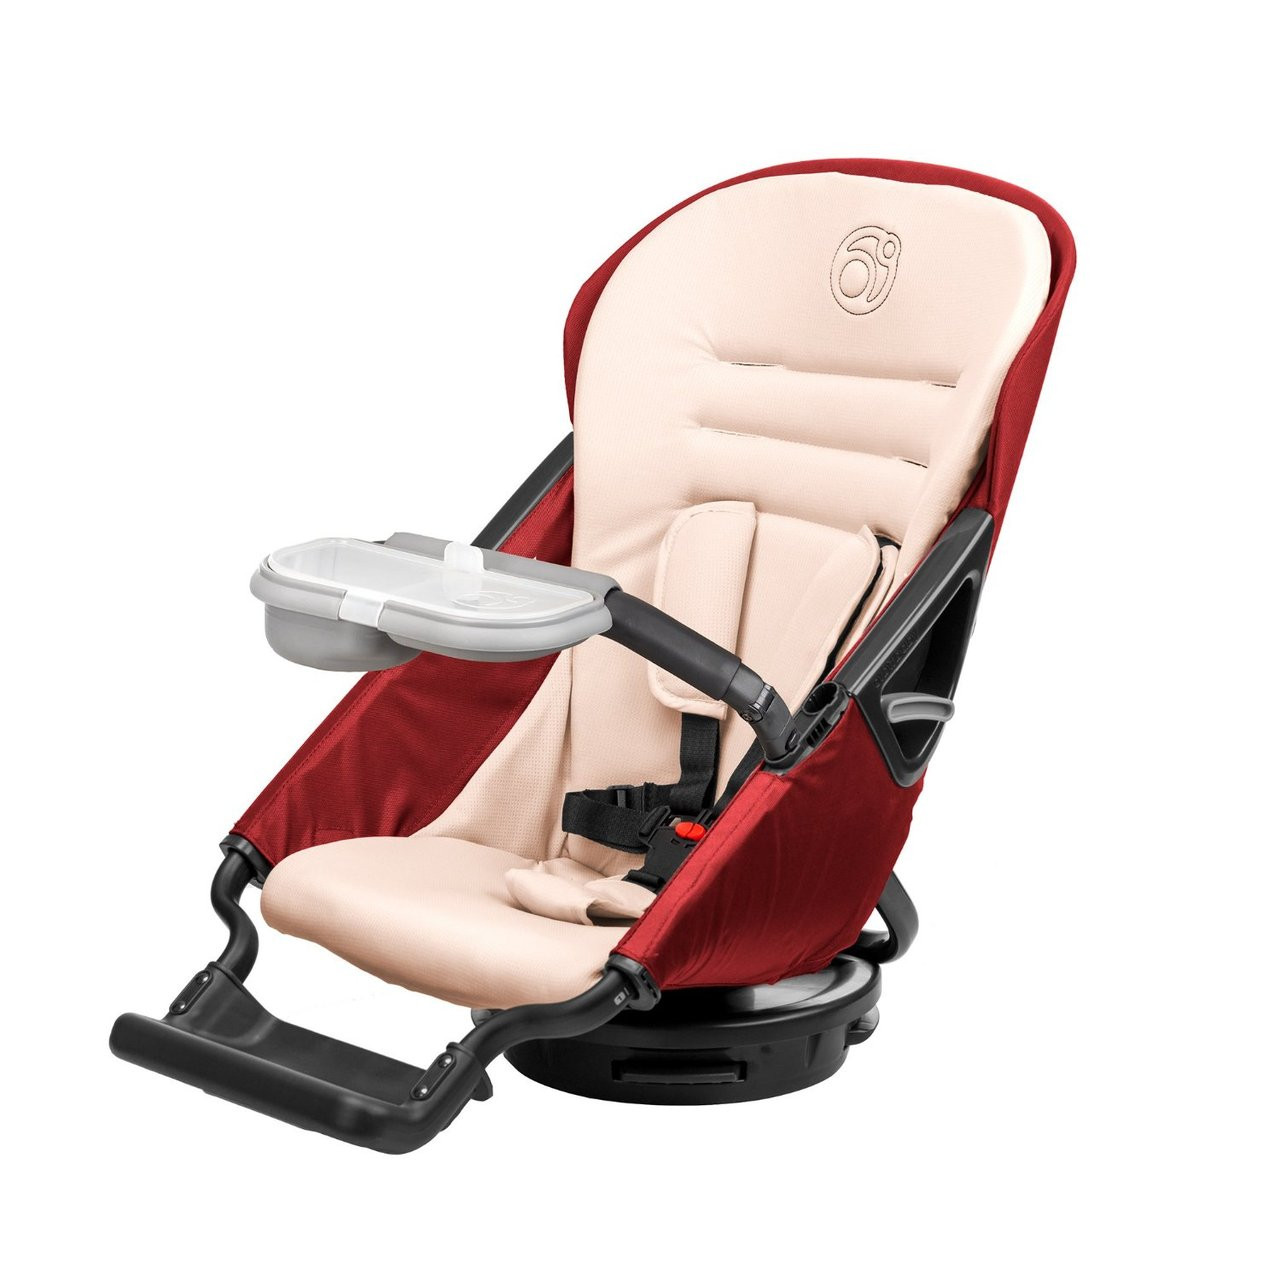 orbit stroller and carseat